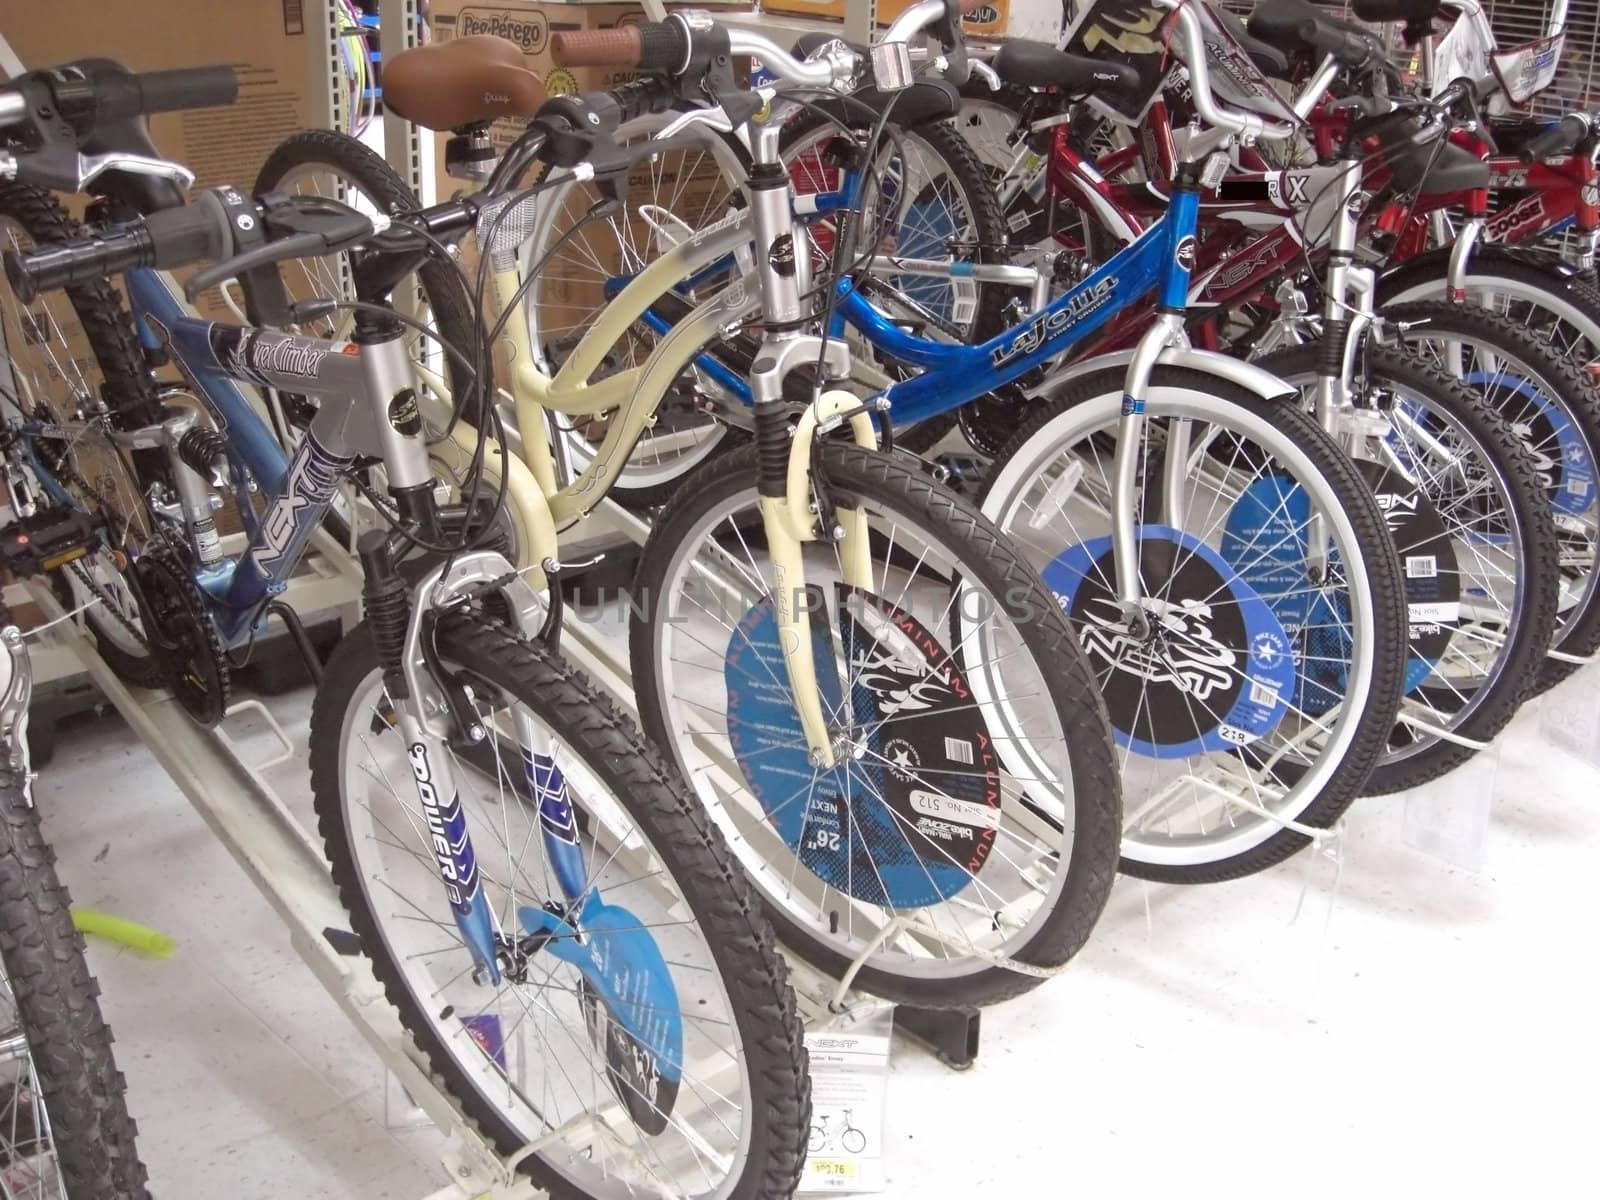 A range of brand new bicycles are neatly displayed inside a bicycle shop.